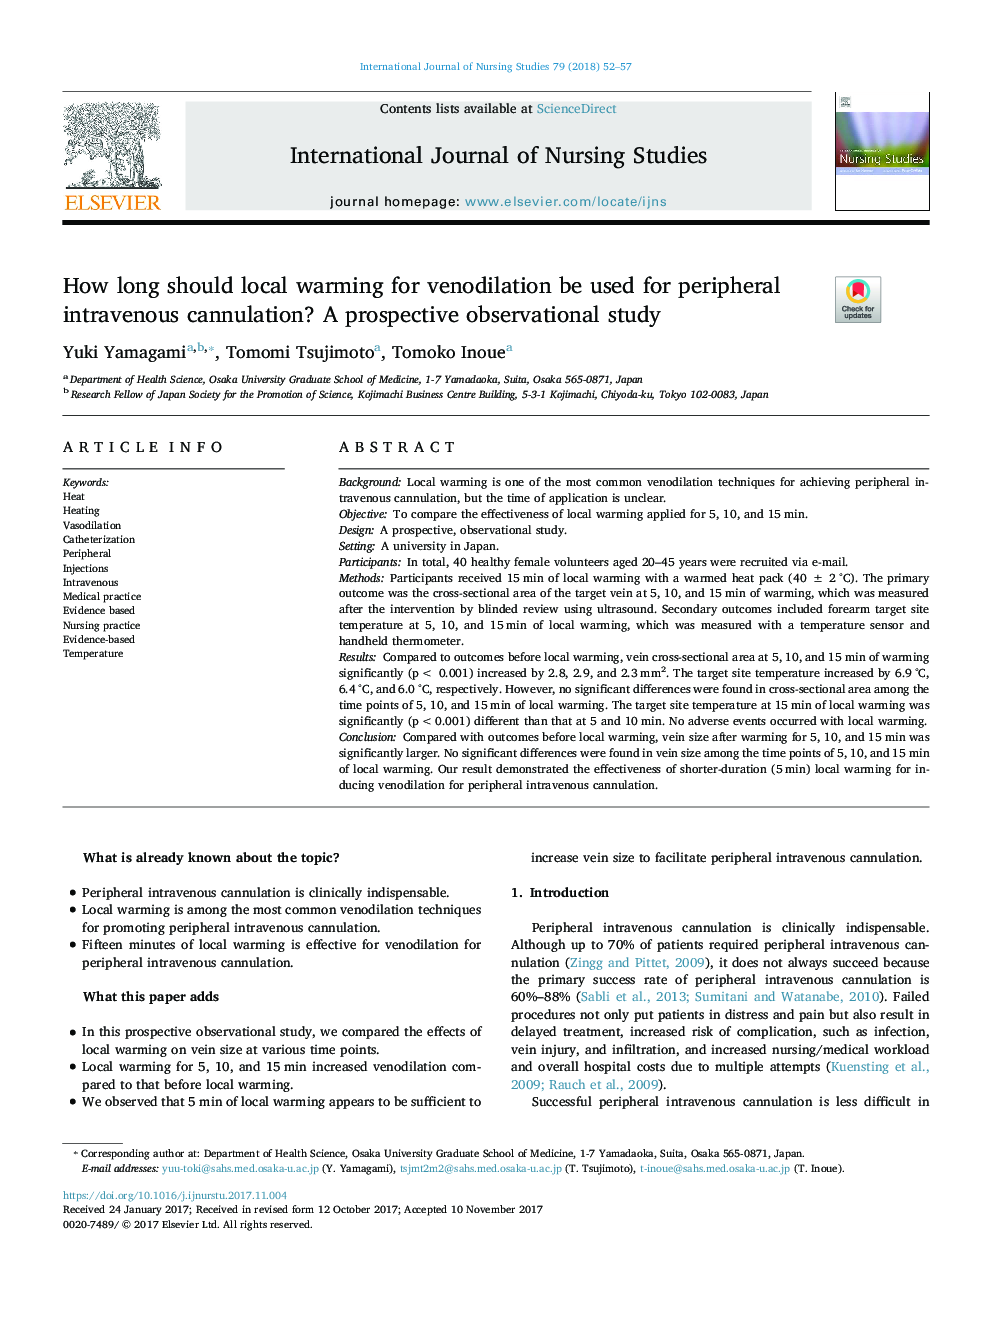 How long should local warming for venodilation be used for peripheral intravenous cannulation? A prospective observational study